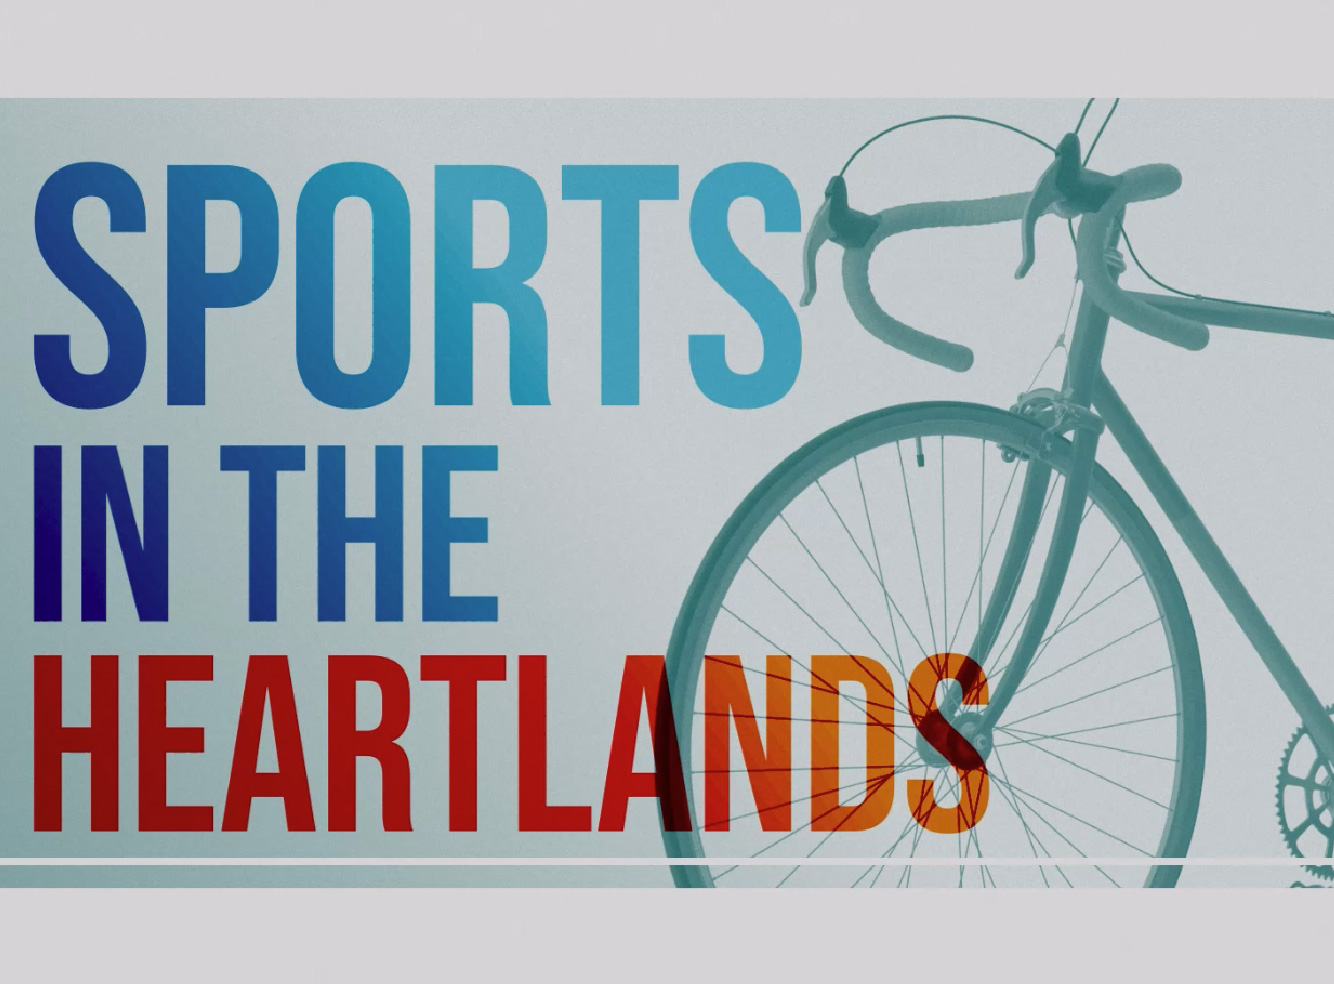  Sports in the Heartlands